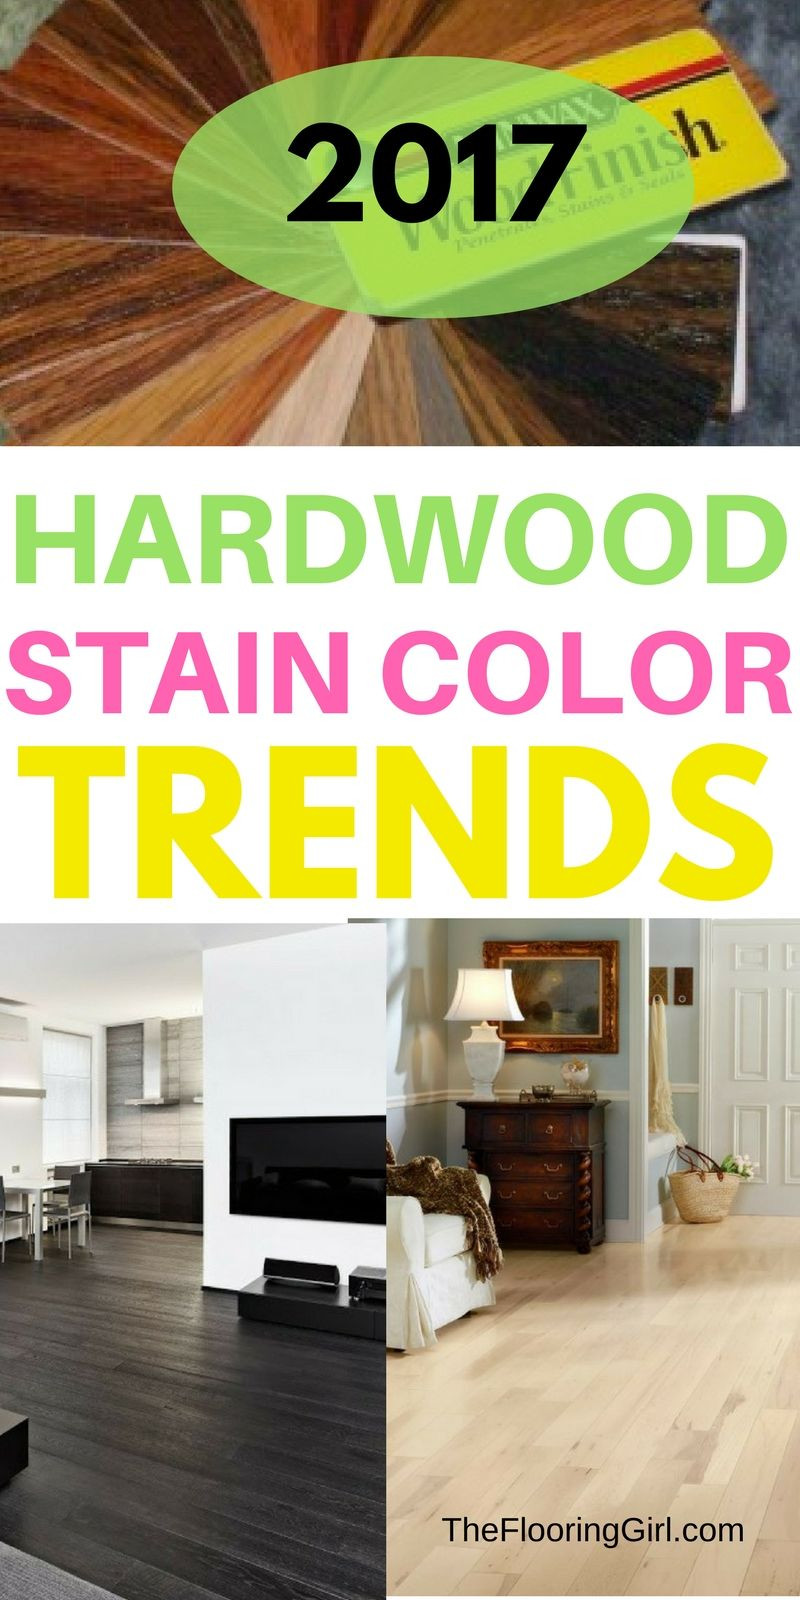 27 Ideal Hardwood Floor Refinishing Near Me 2024 free download hardwood floor refinishing near me of hardwood flooring stain color trends 2018 more from the flooring with regard to hardwood flooring stain color trends for 2017 hardwood colors that are i